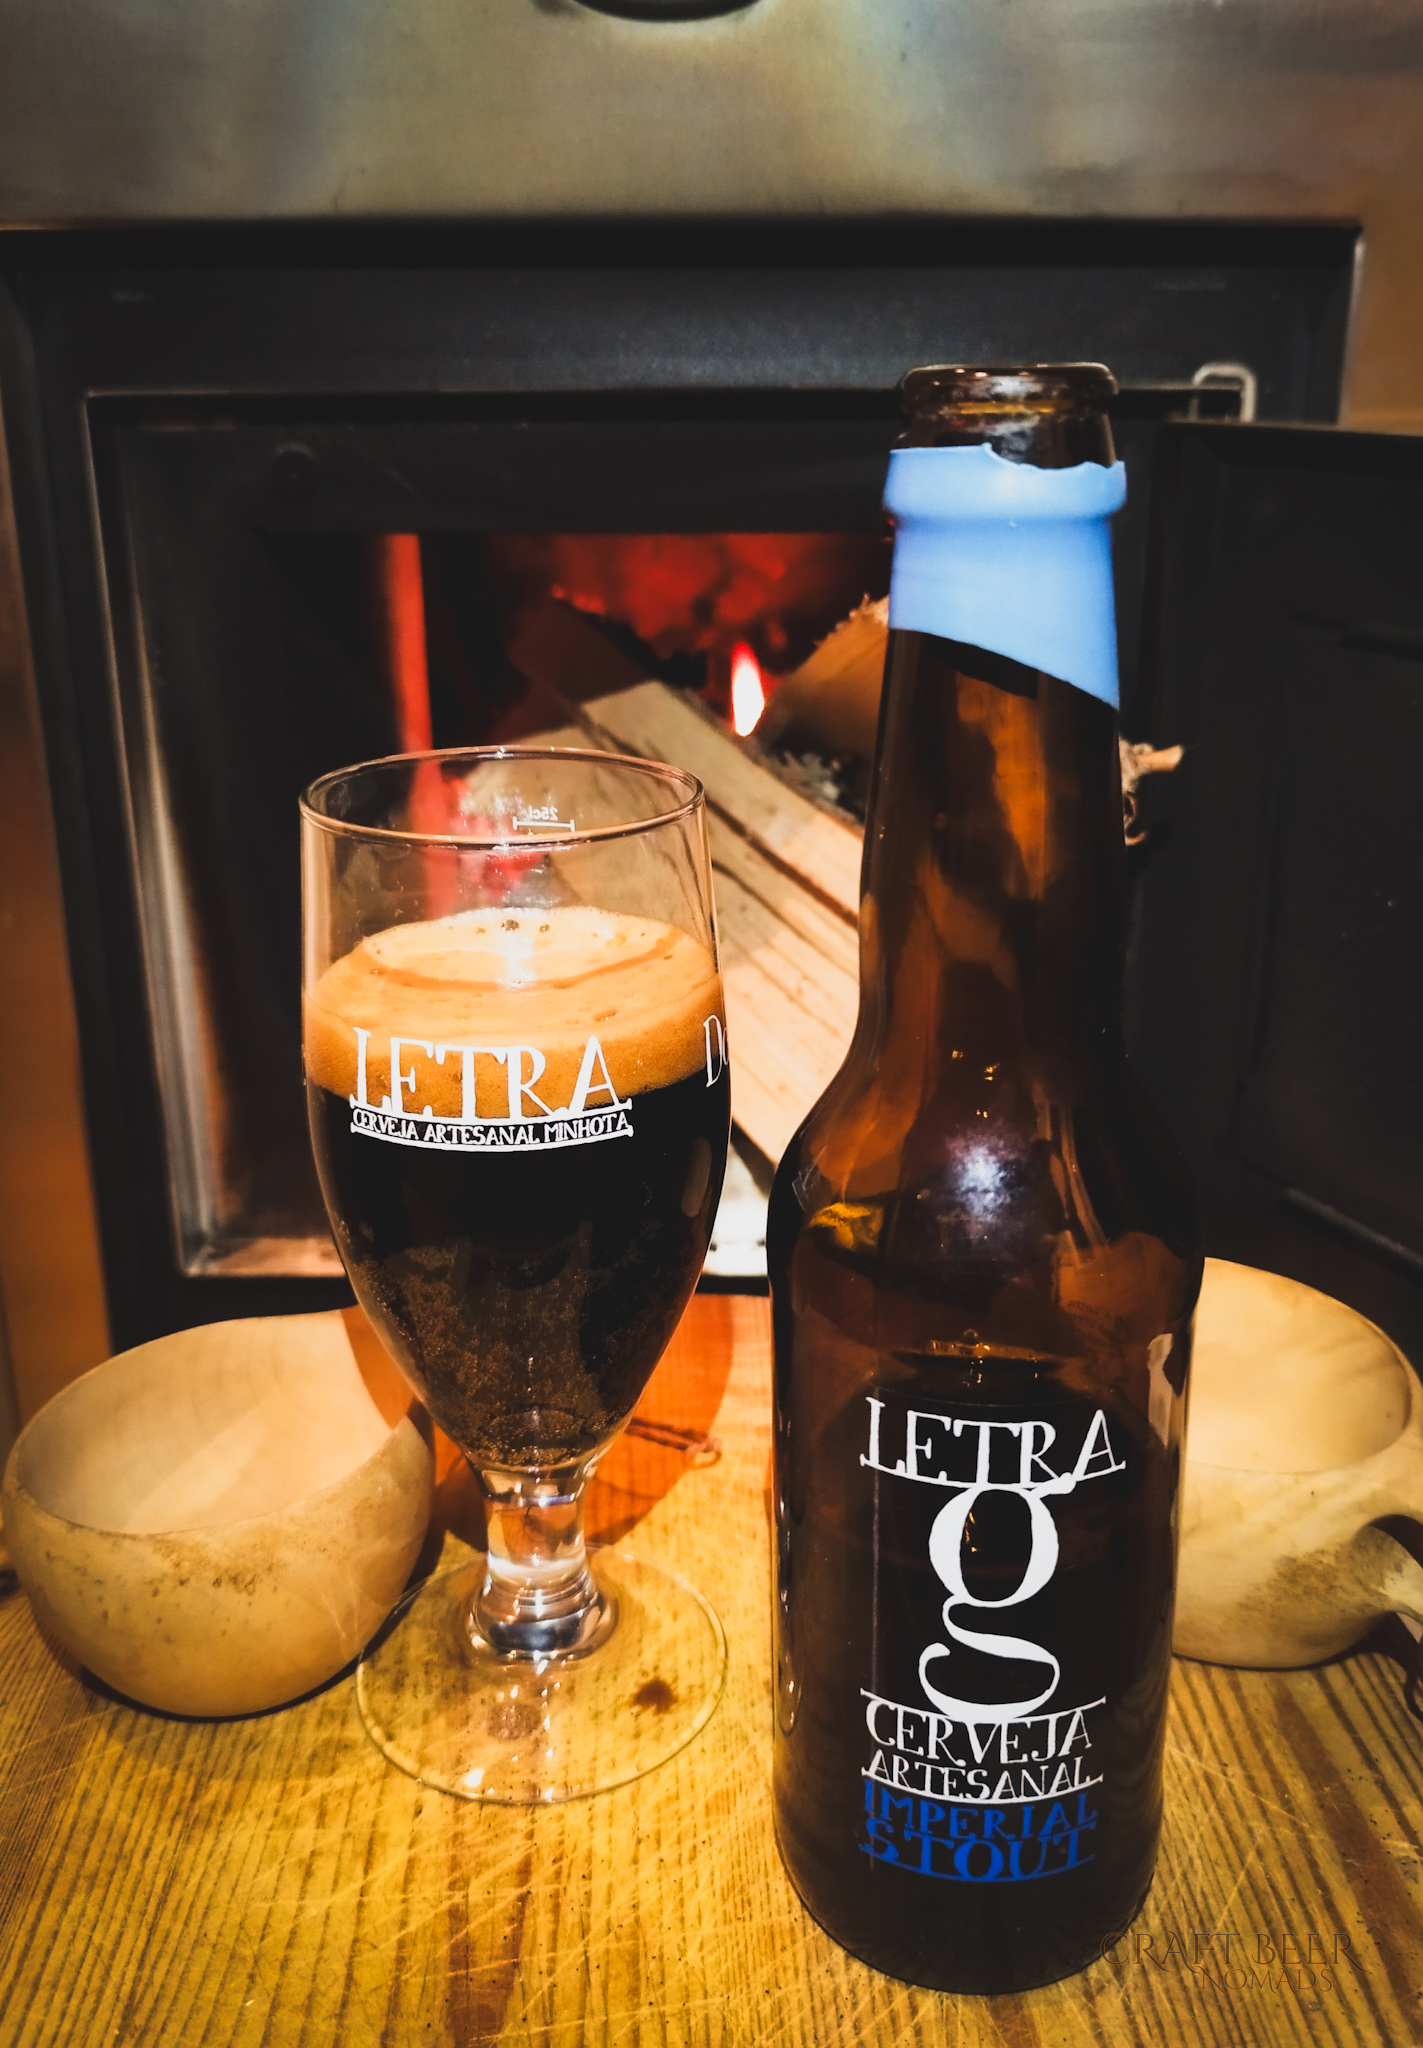 Letra G Imperial Stout | Craft beer in Portugal: Letra Brewery | Craft Beer Nomads